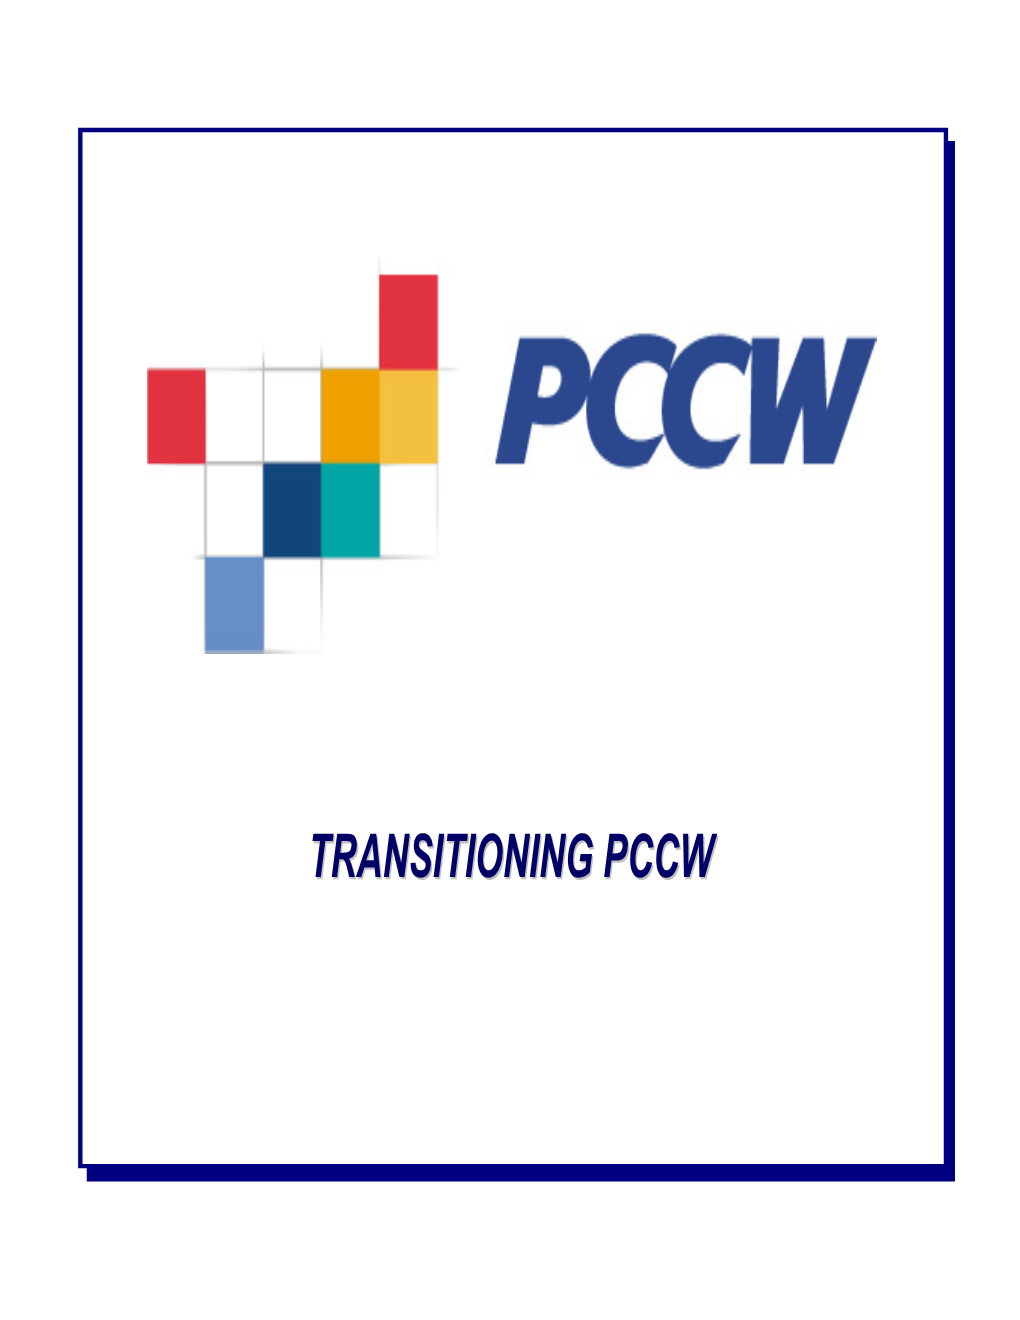 Transitioning Pccwpccw Forward Looking Statements